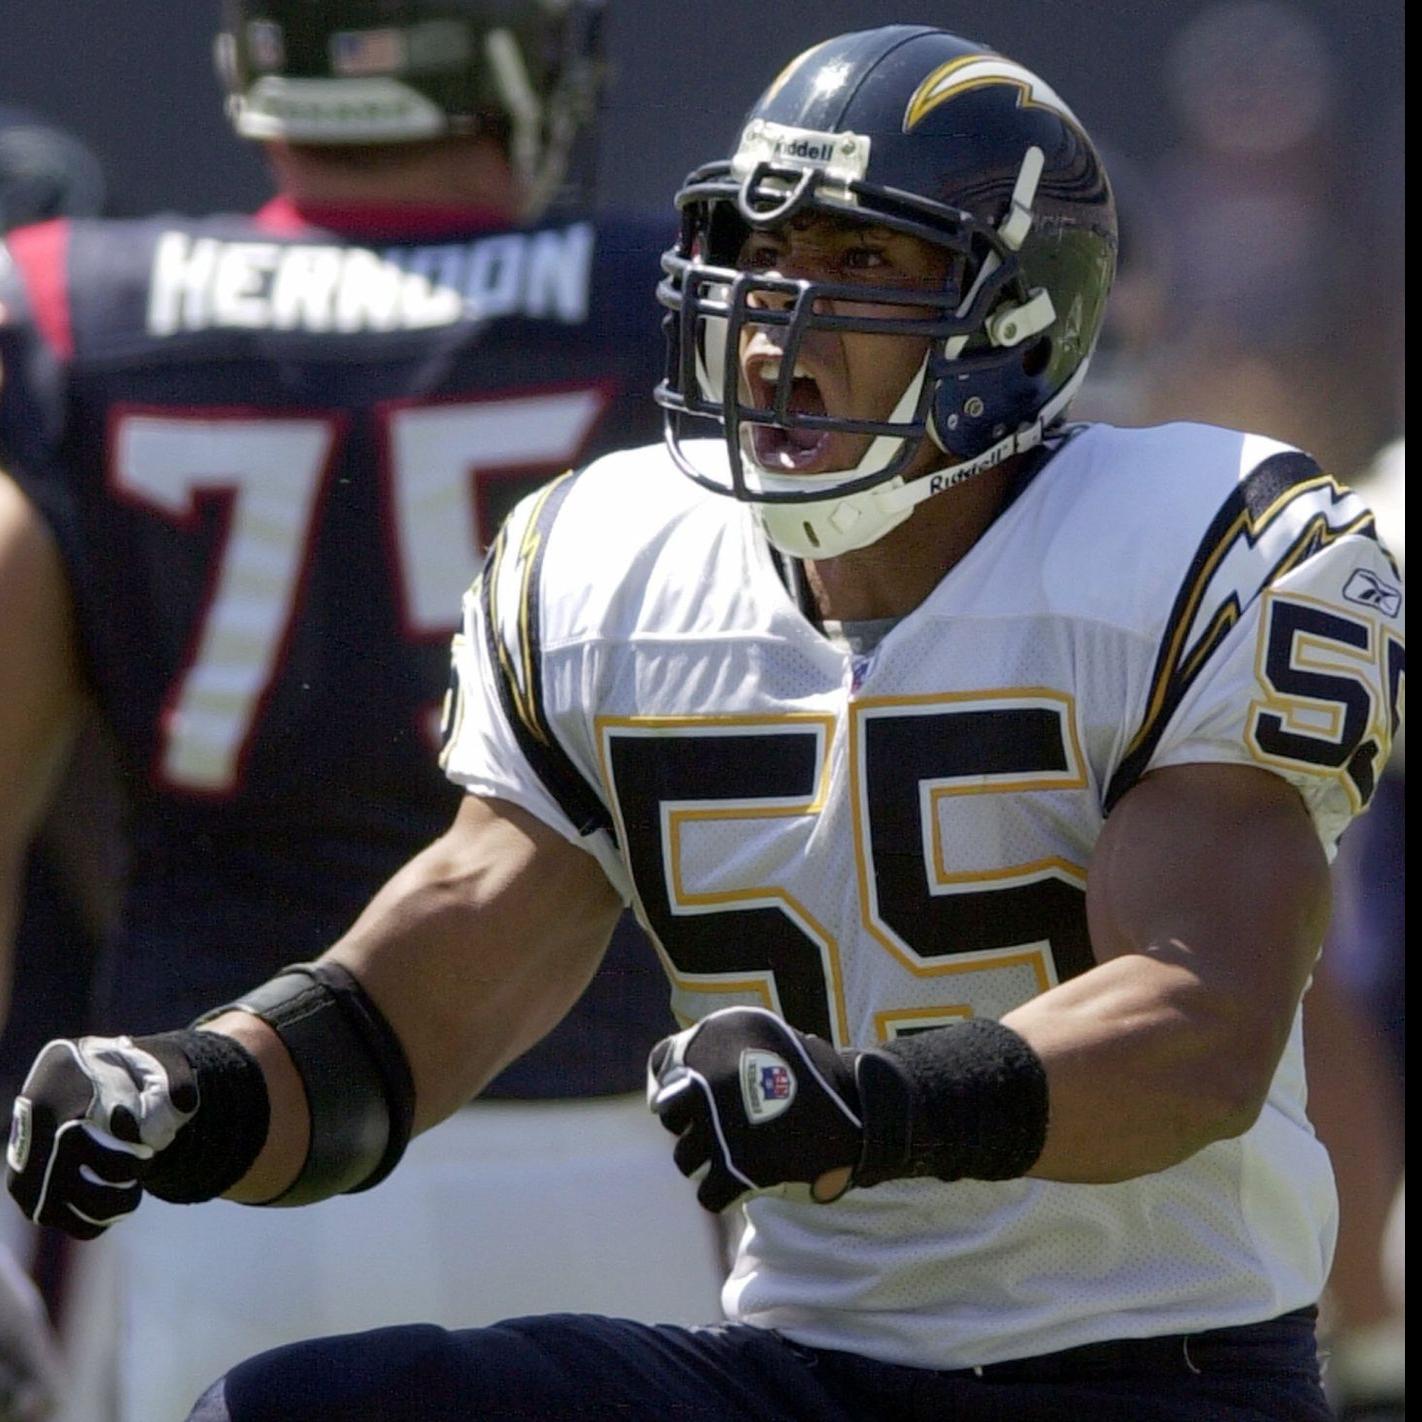 Junior Seau, Jerome Bettis among those elected to Pro Football Hall of Fame, Sports